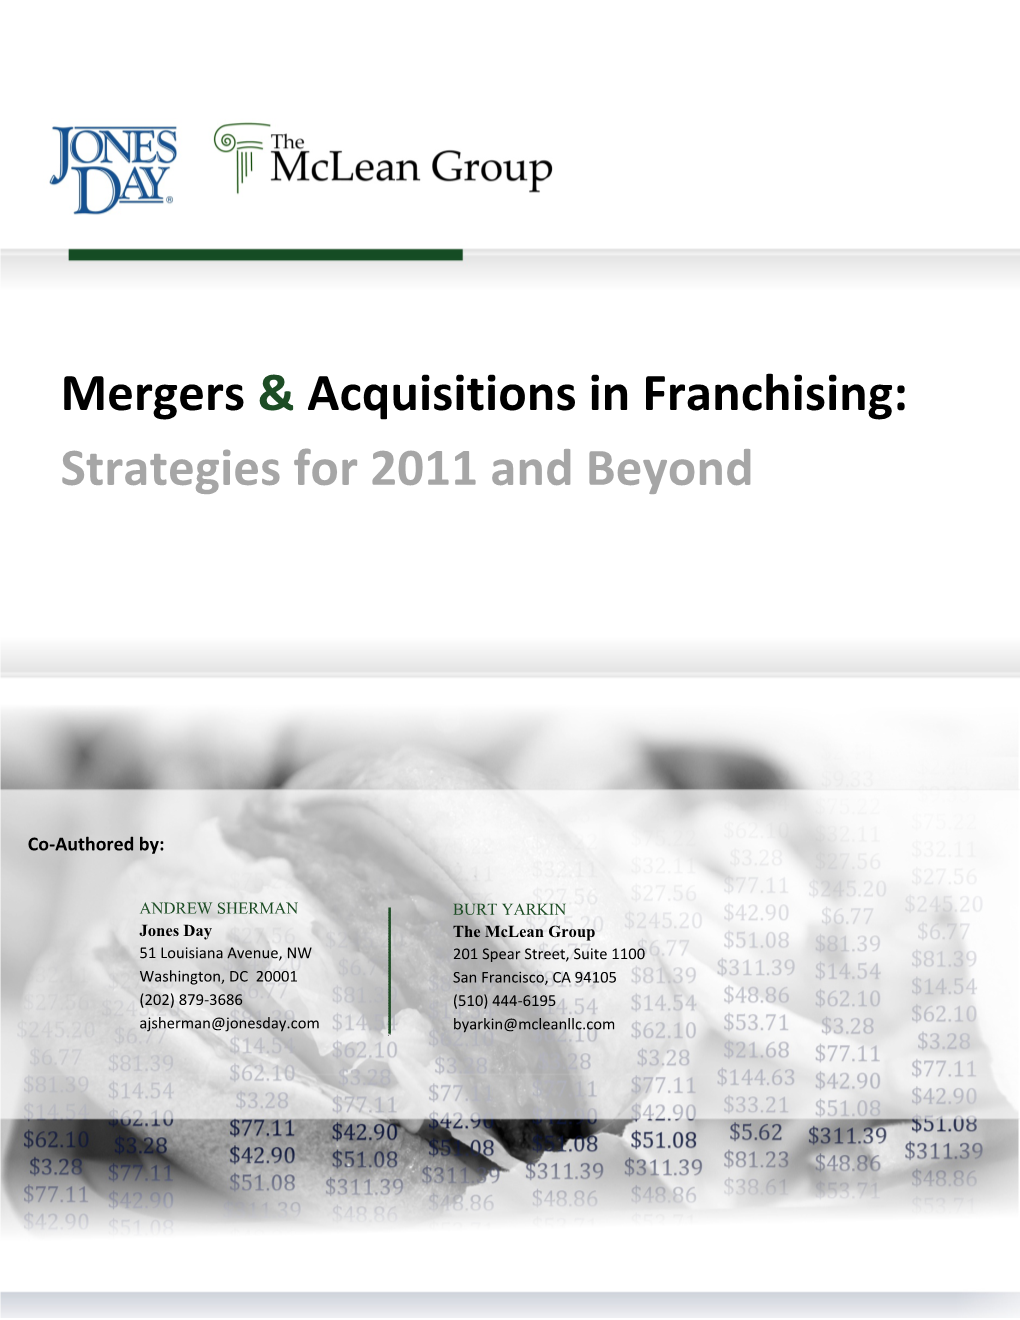 Mergers & Acquisitions in Franchising